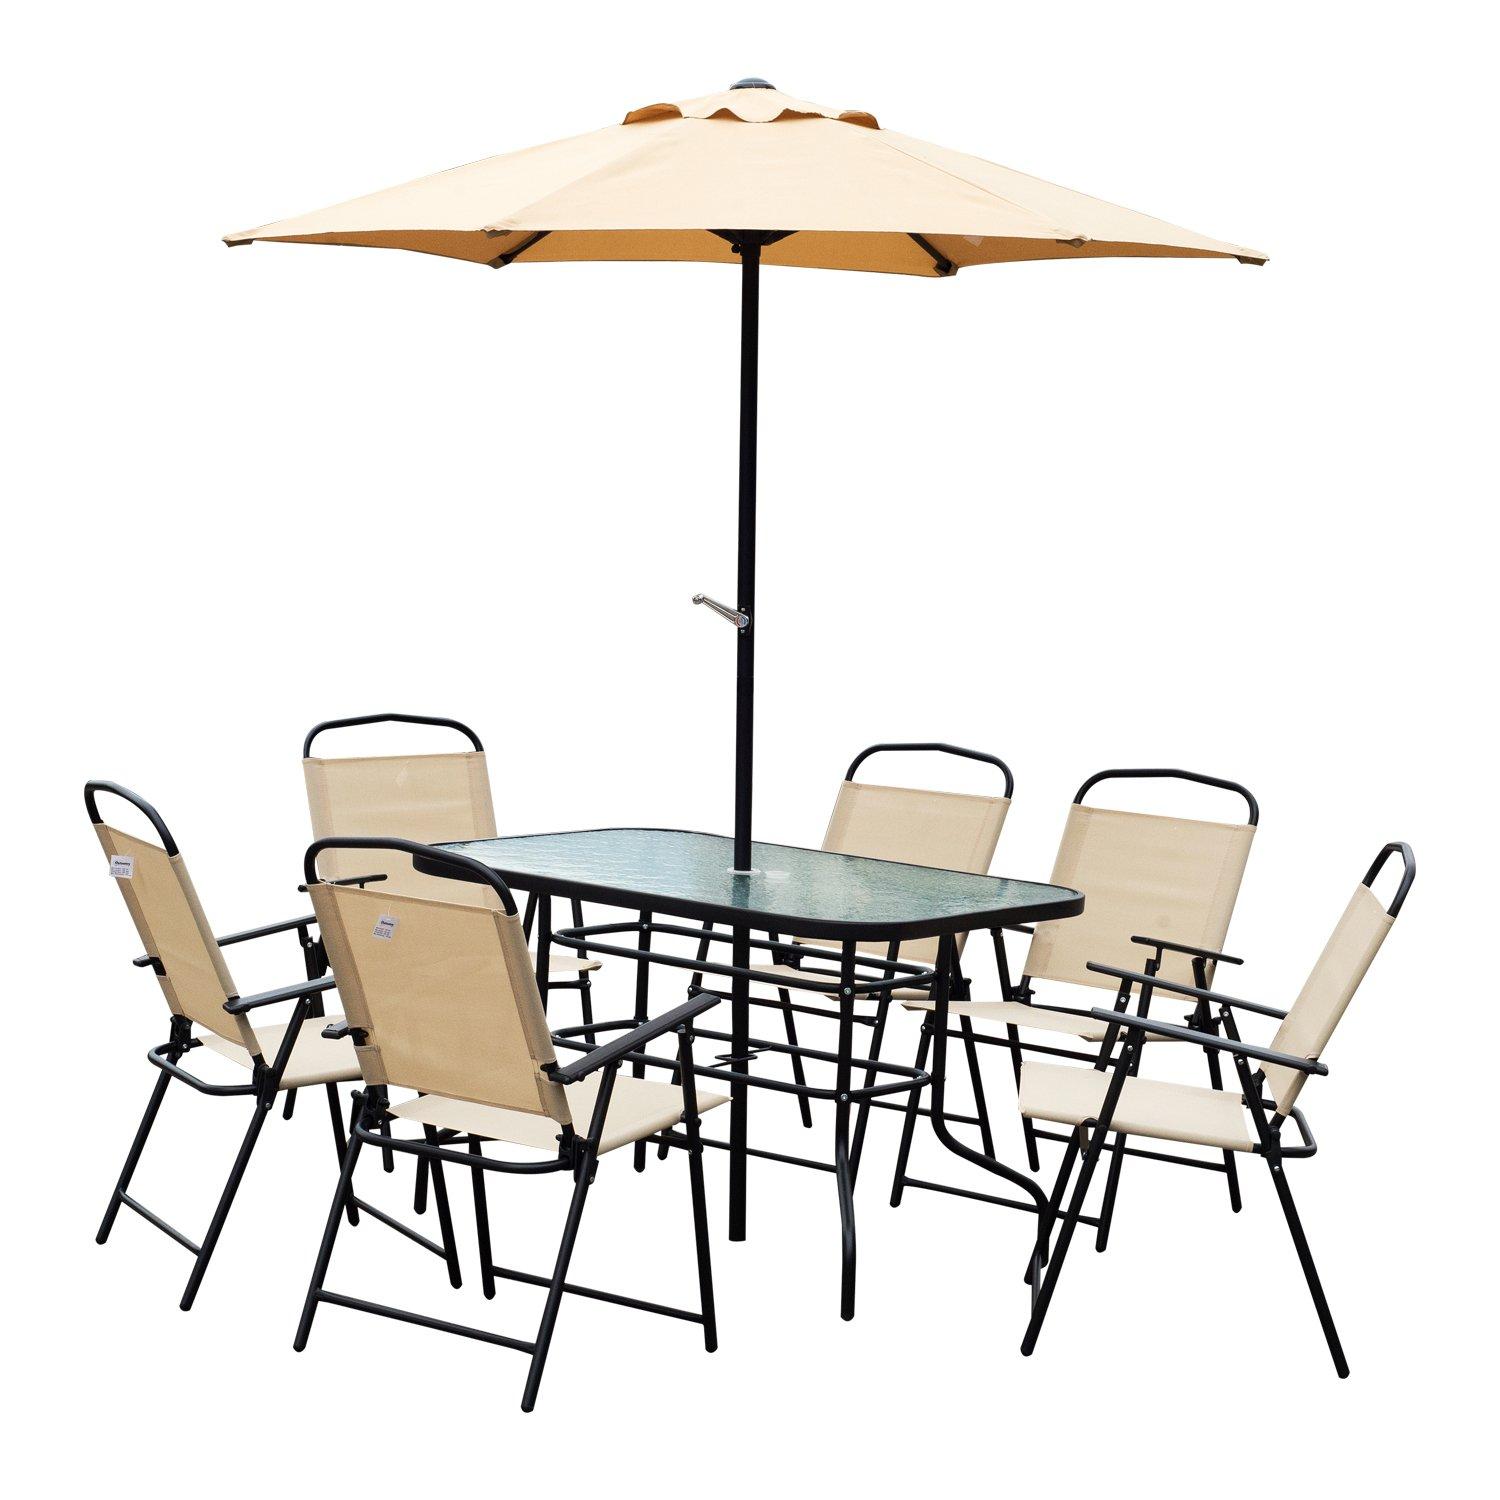 8 Pieces Dining Set Furniture Foldable Chair Table Parasol Garden